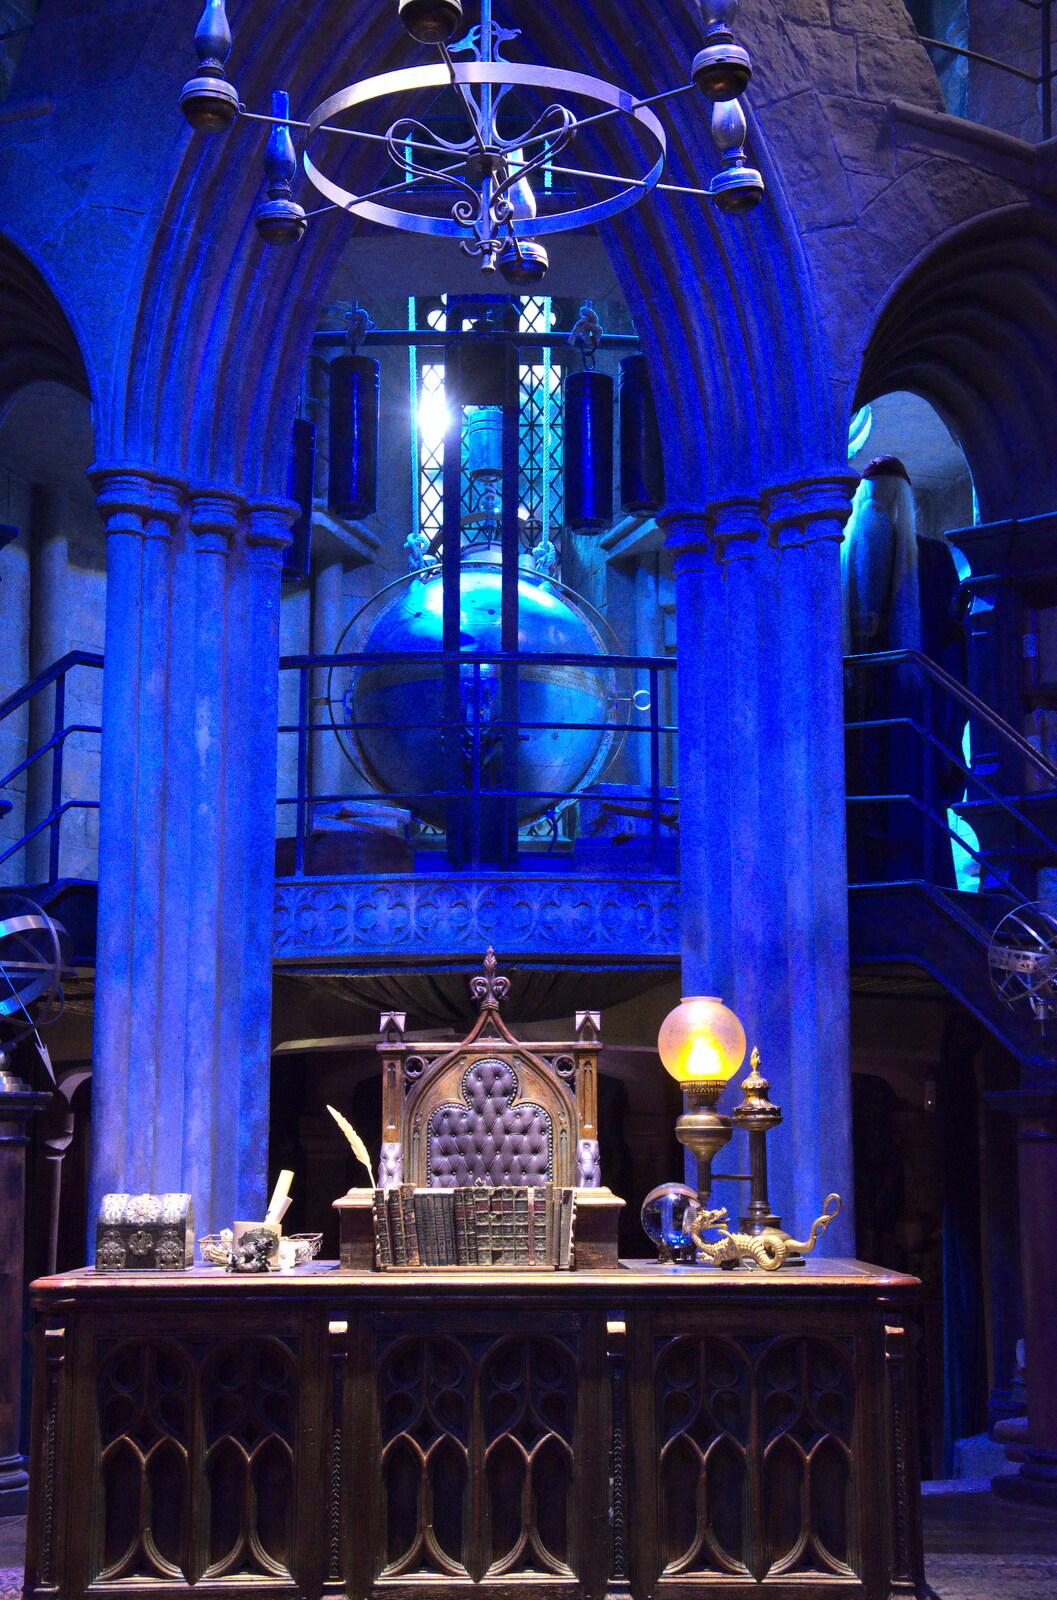 Dumbledore's office from A Trip to Harry Potter World, Leavesden, Hertfordshire - 16th February 2020